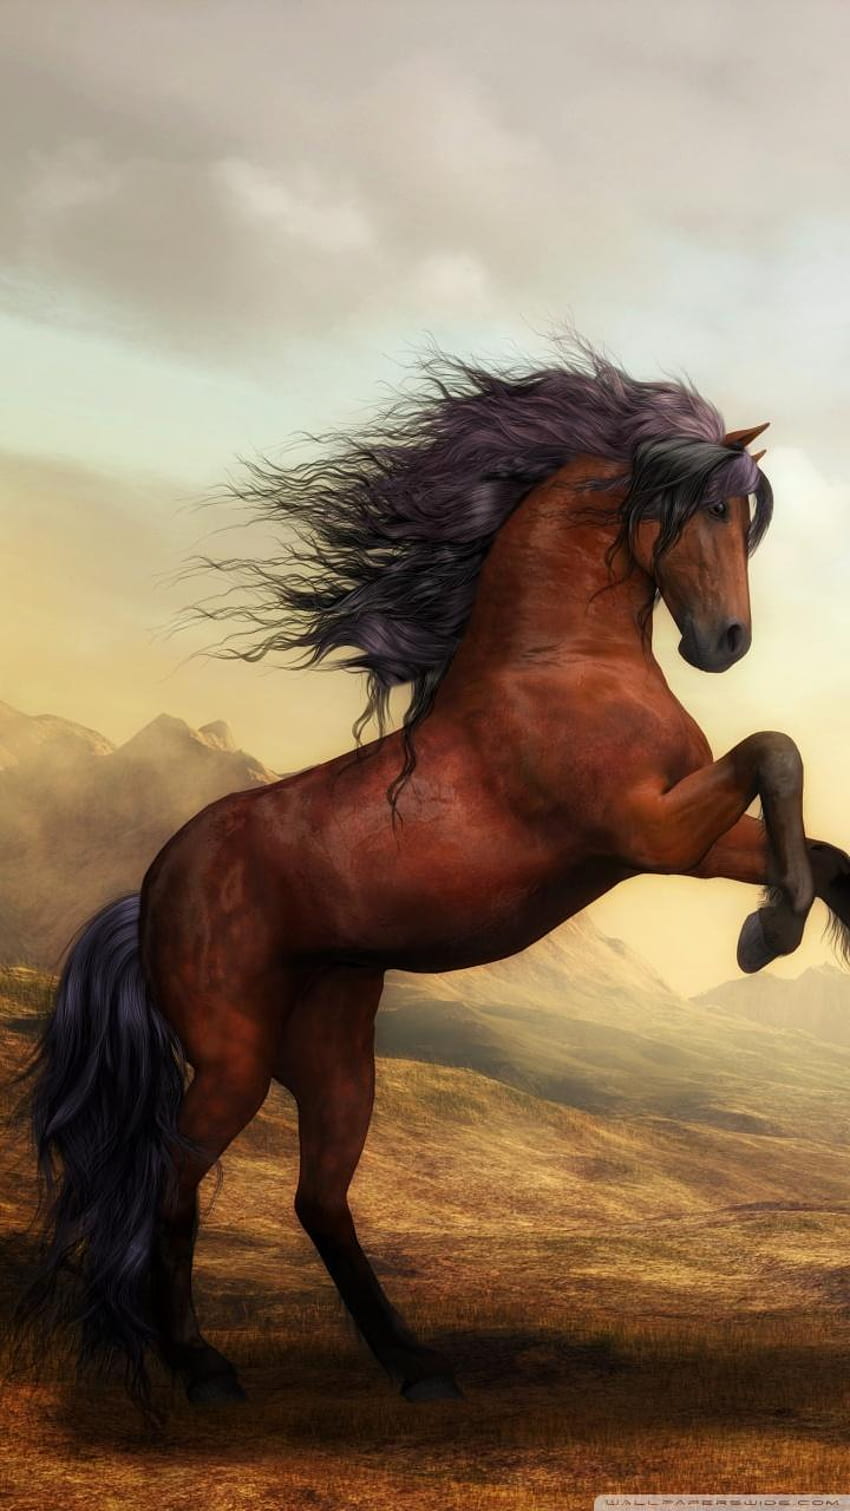 Horse for Android, Horse Scenery HD phone wallpaper